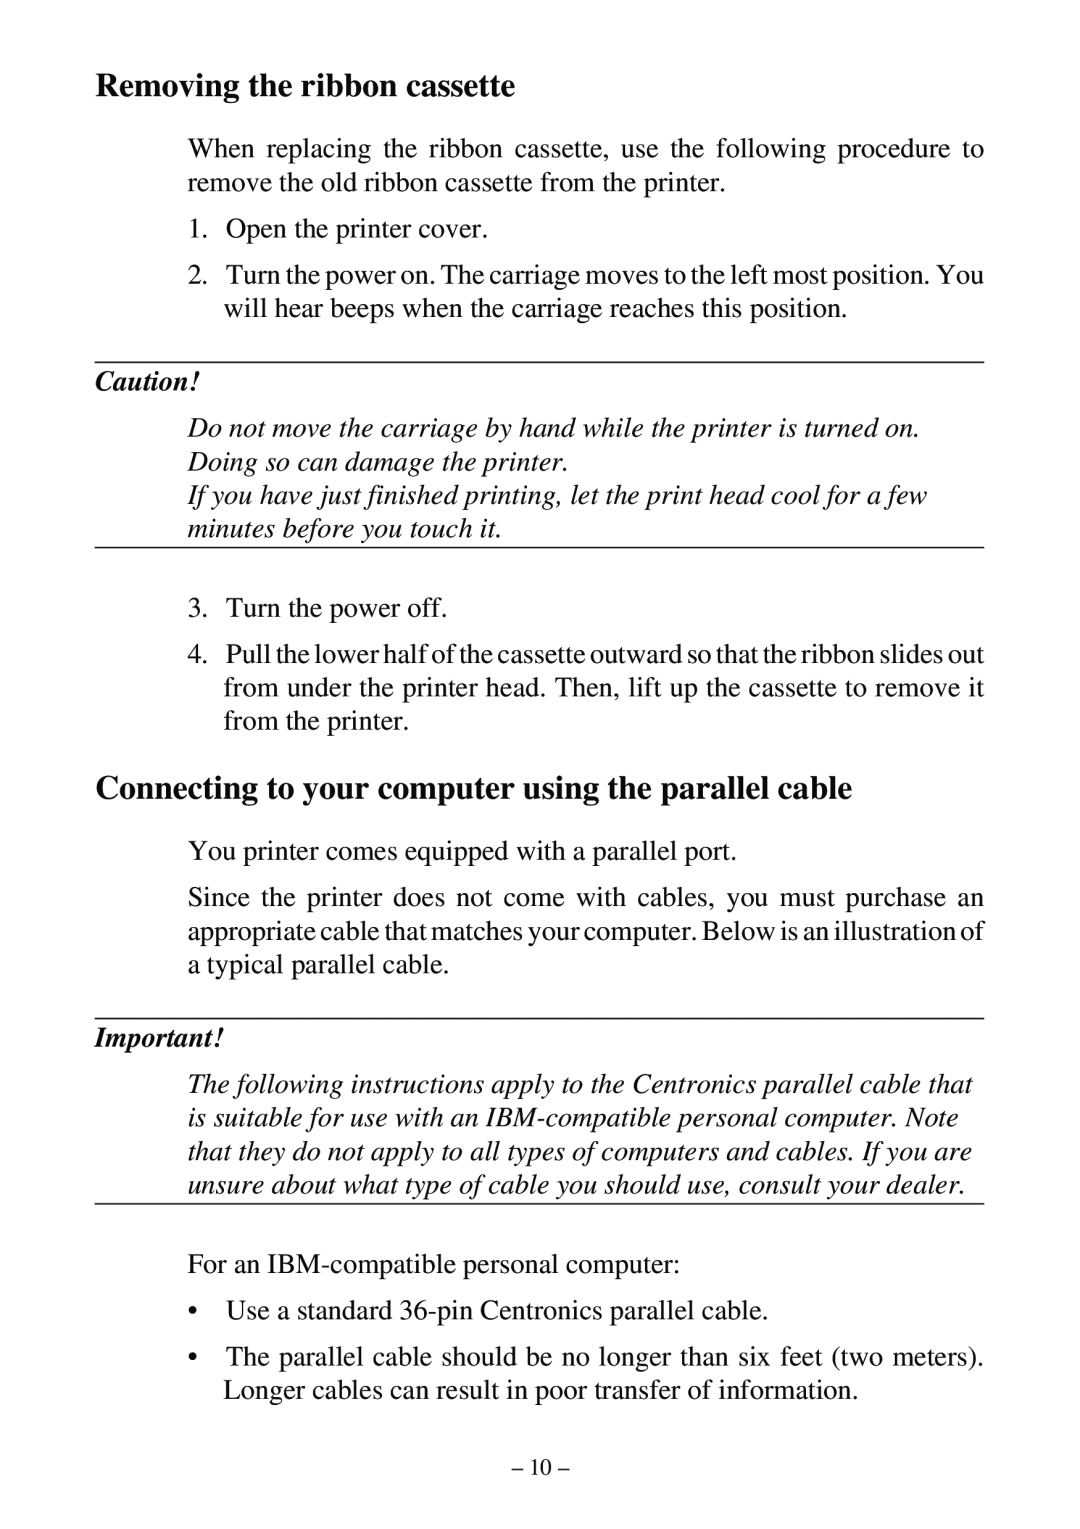 Star Micronics LC-500 user manual Removing the ribbon cassette, Connecting to your computer using the parallel cable 